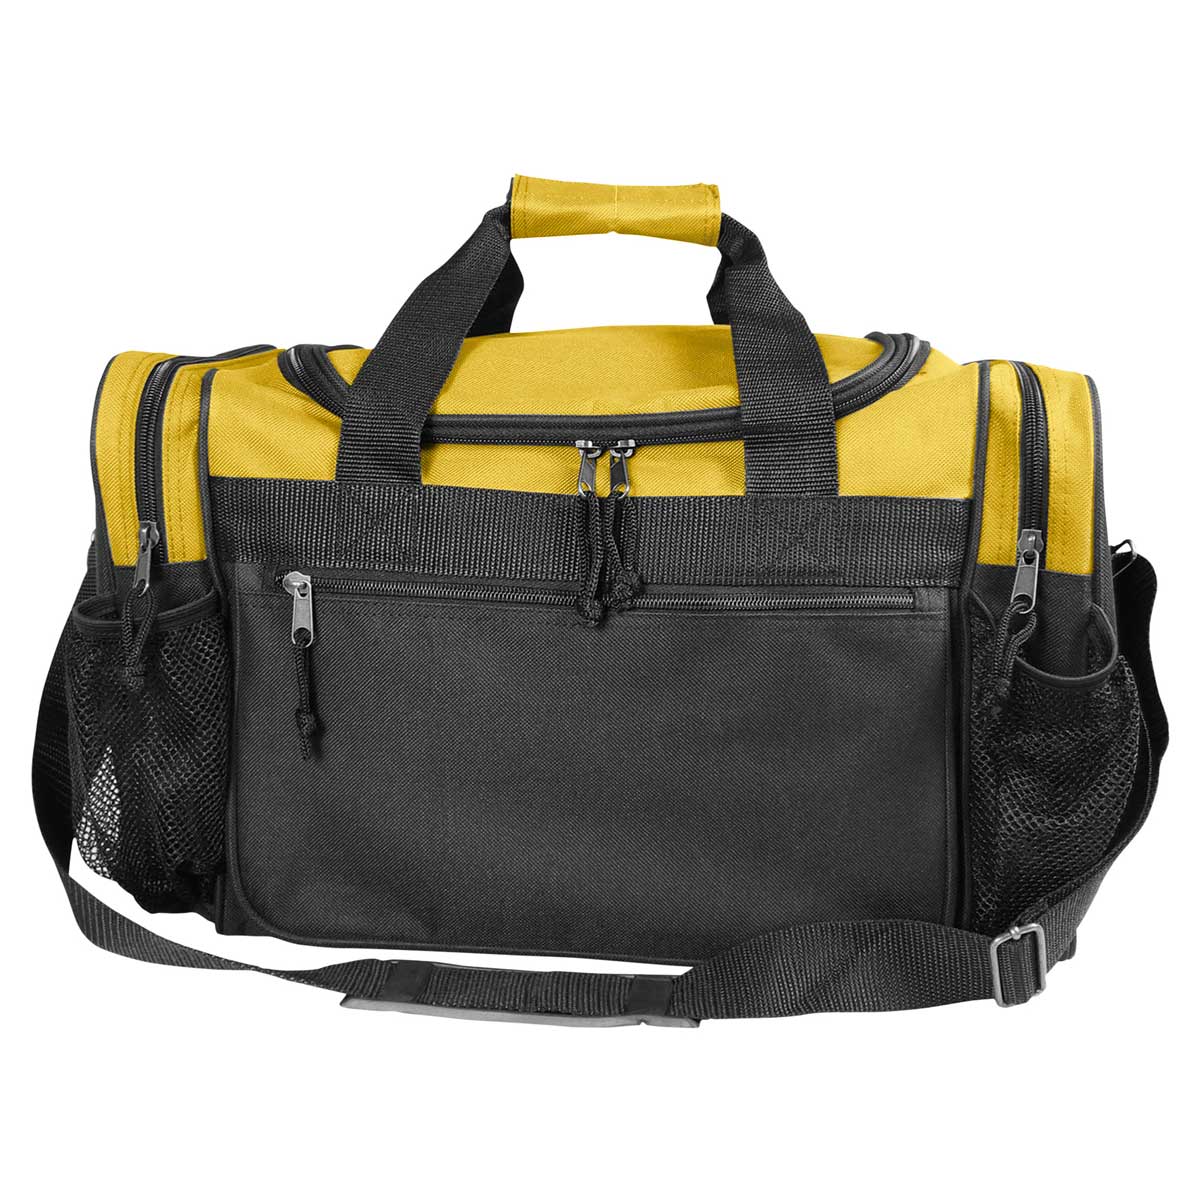 Buy Wholesale China Canvas Duffle Bag For Travel - 55l Duffle Bag